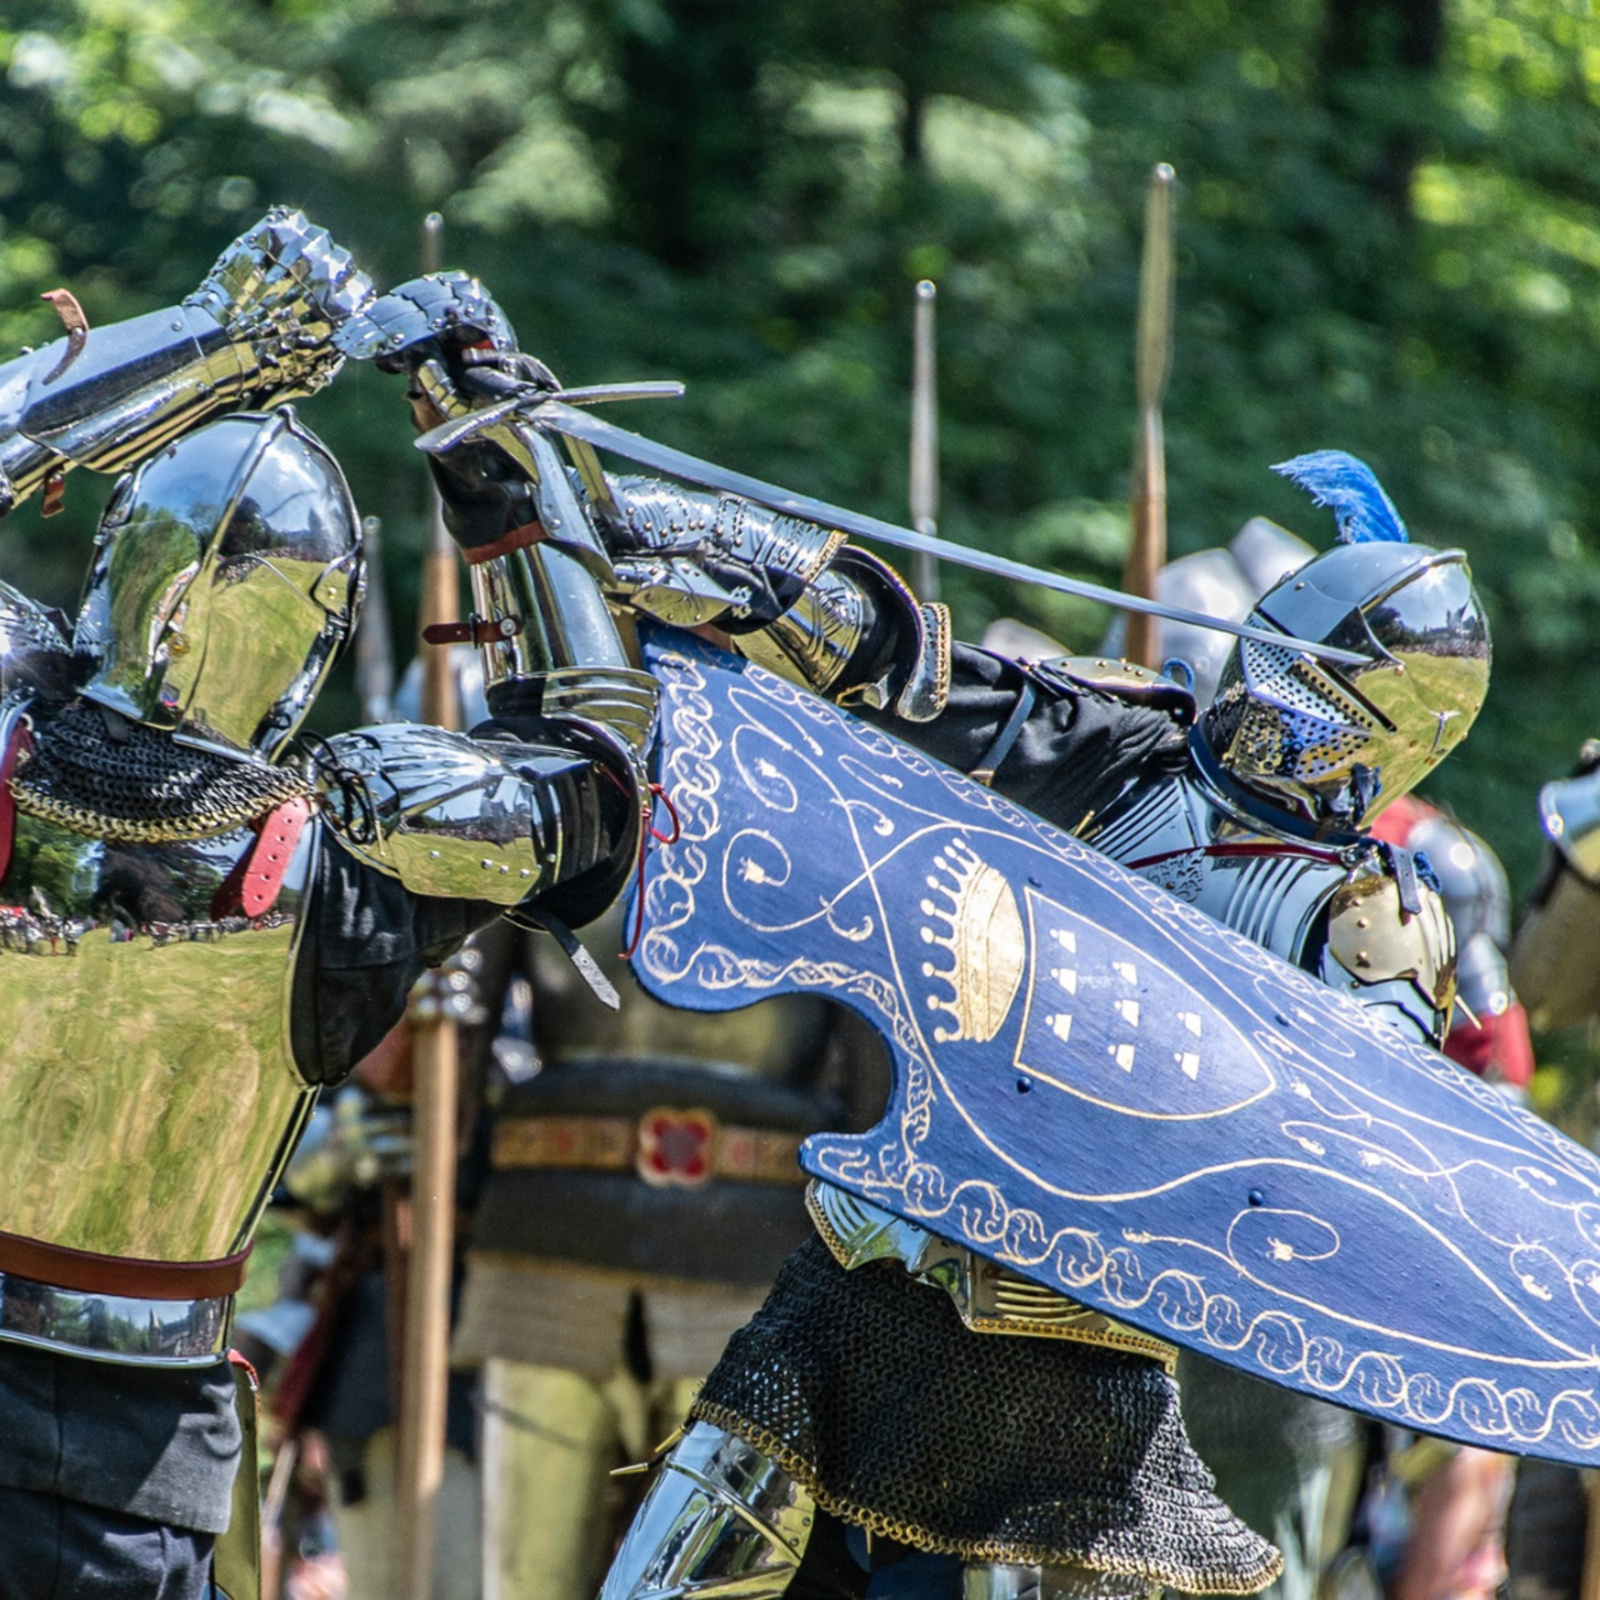 Armored knights fighting